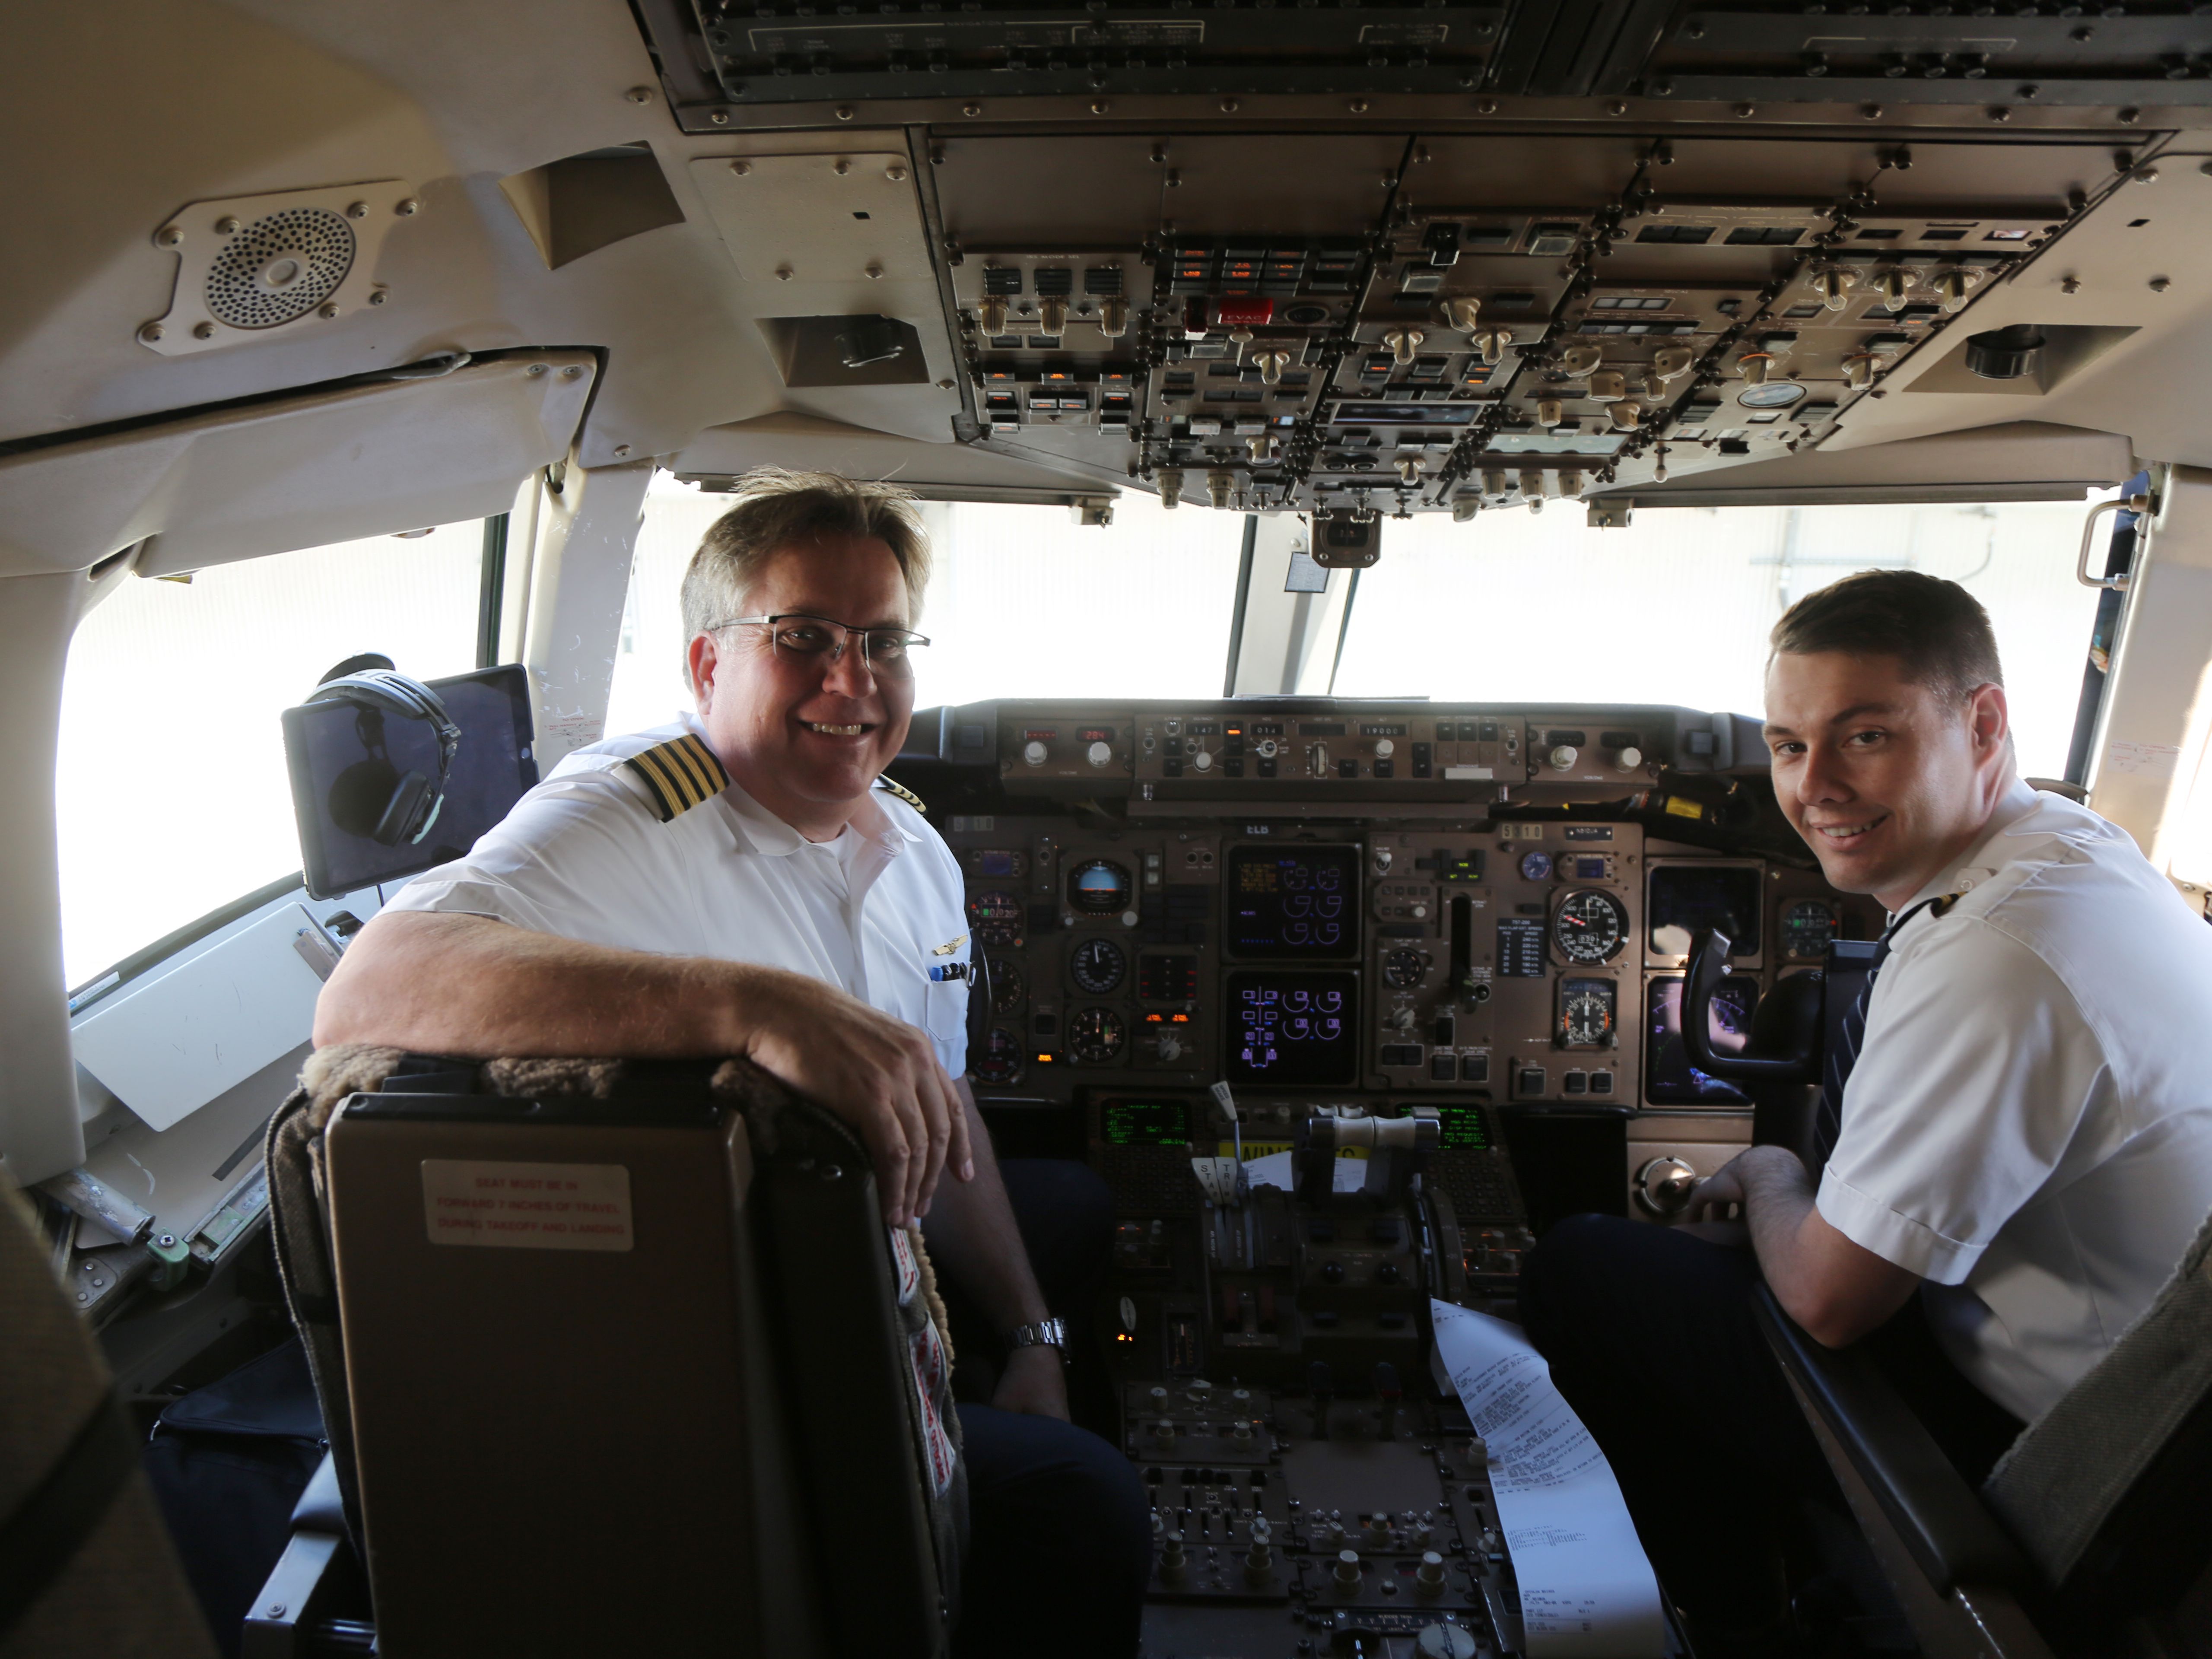 shutterstock_1315749092 - AUCKLAND, NEW ZEALAND - FEBRUARY 5, 2019: United Airlines pilots at cockpit before transpacific flight to San Francisco in Auckland International Airport, New Zealand